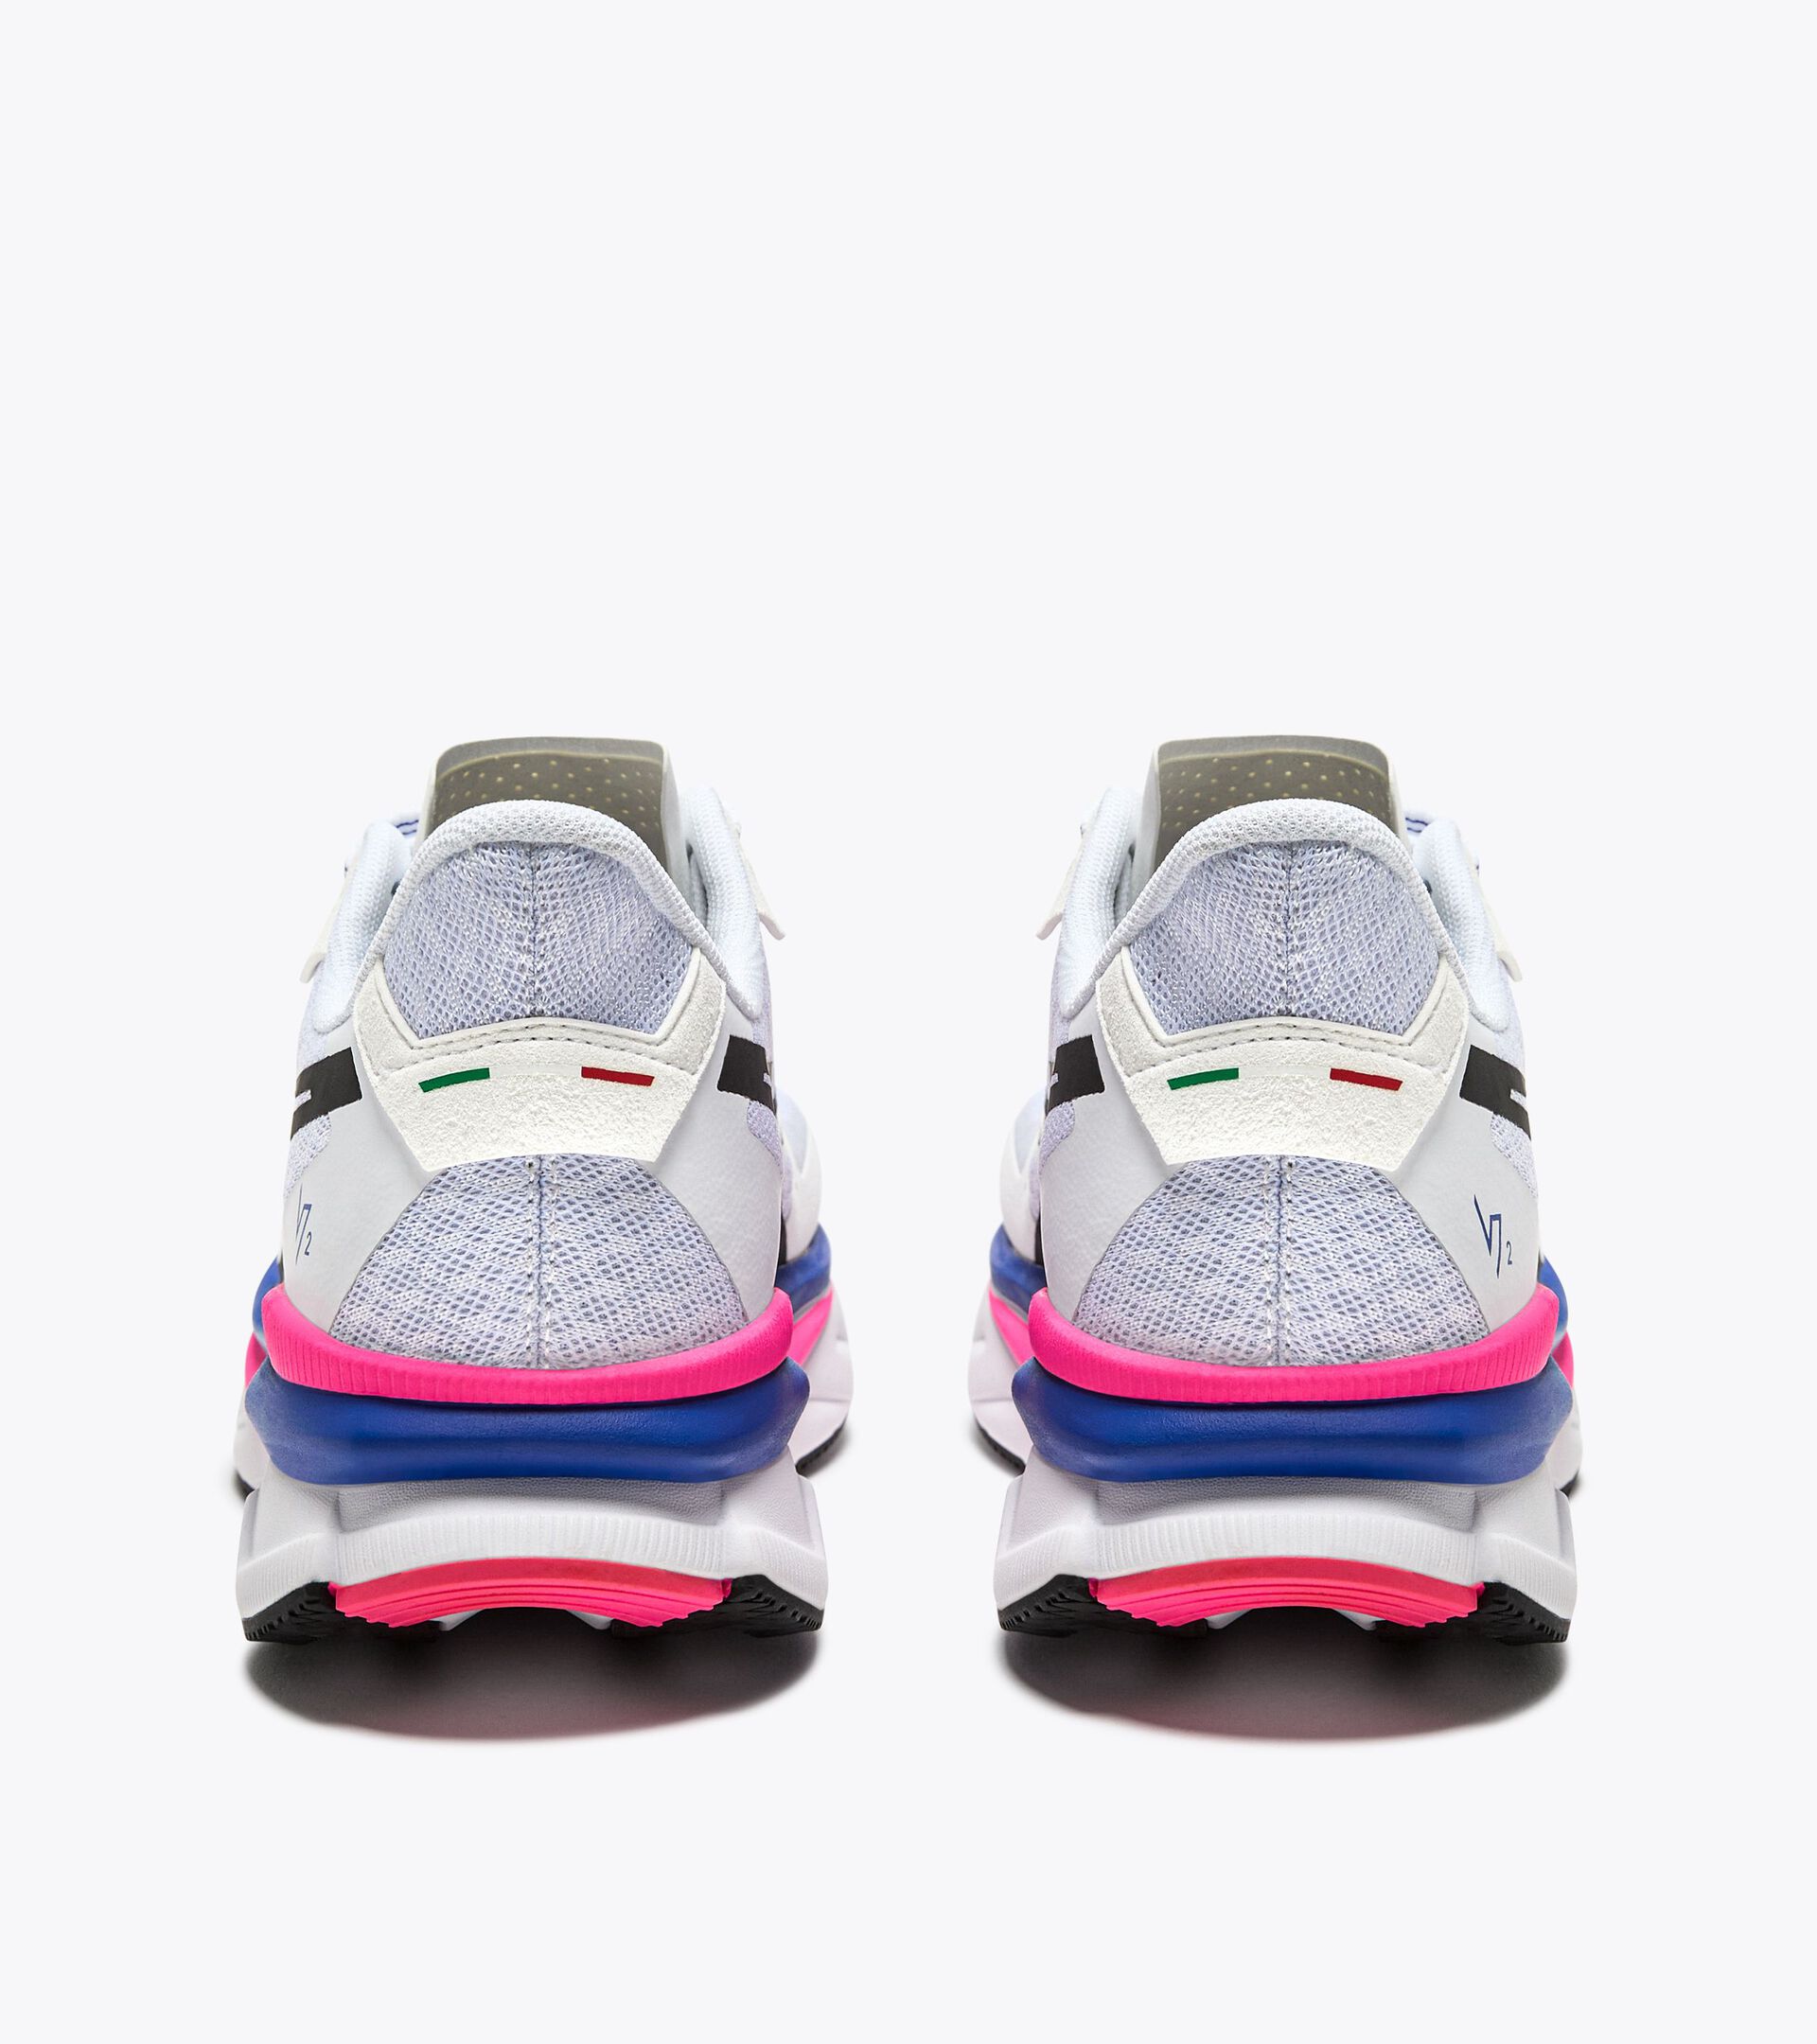 Made in Italy running shoe - Lightness and cushioning - Unisex ATOMO V7000-2 WHITE/SURF THE WEB/PINK FLUO - Diadora